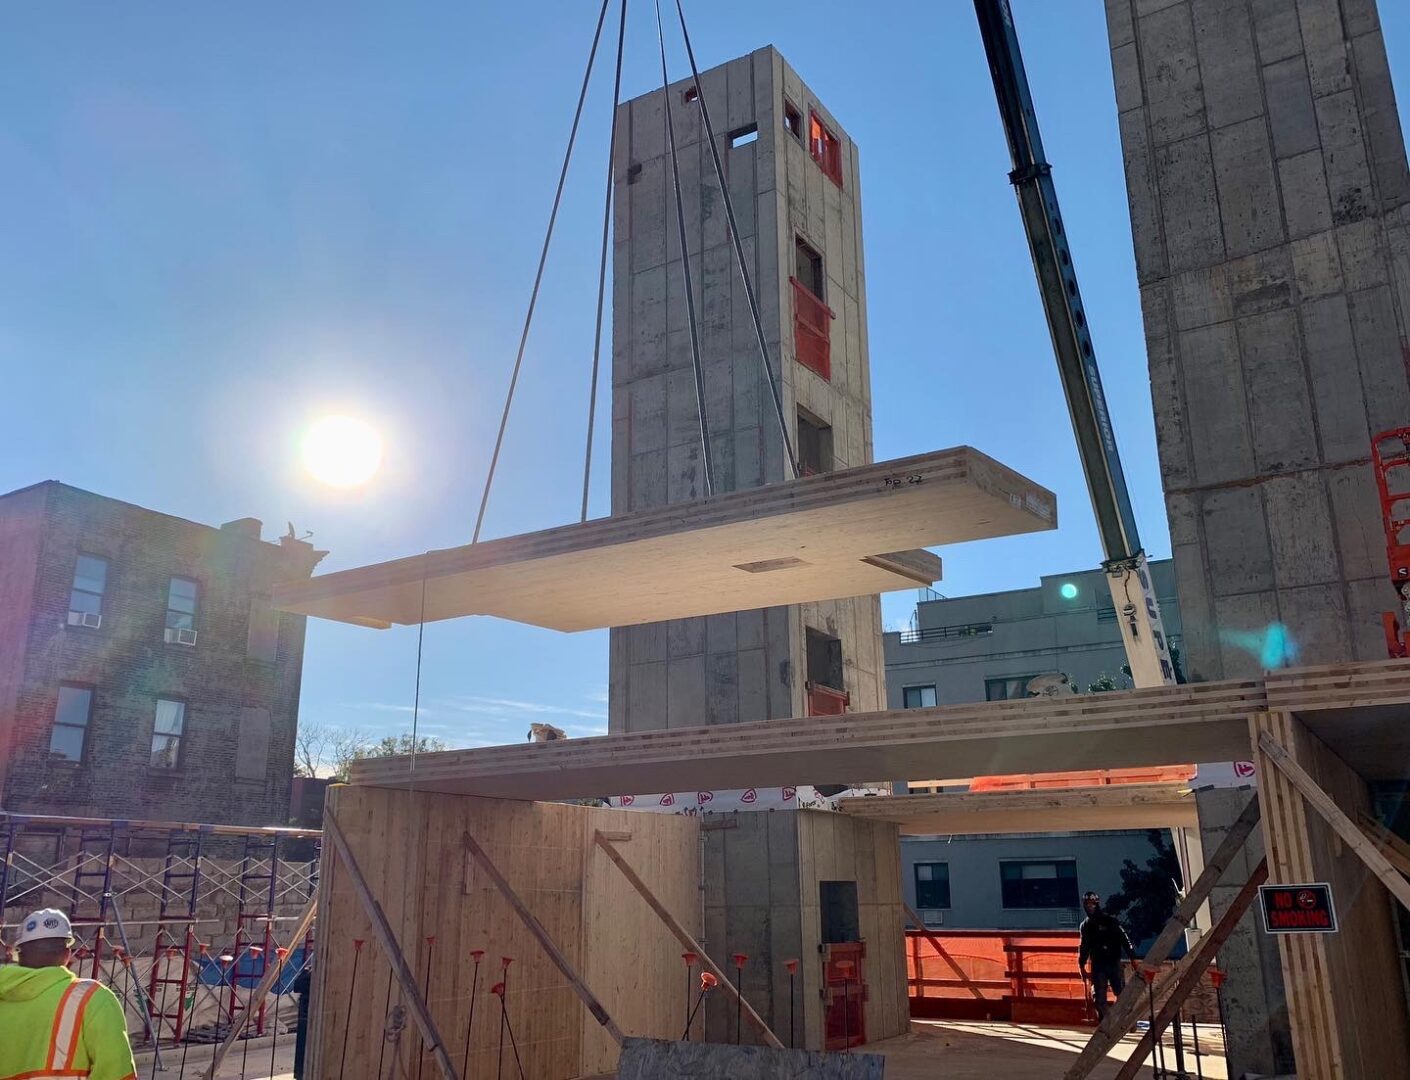 The first Cross Laminated Timber building in New York City utilizes a crane to lift a concrete column into place.